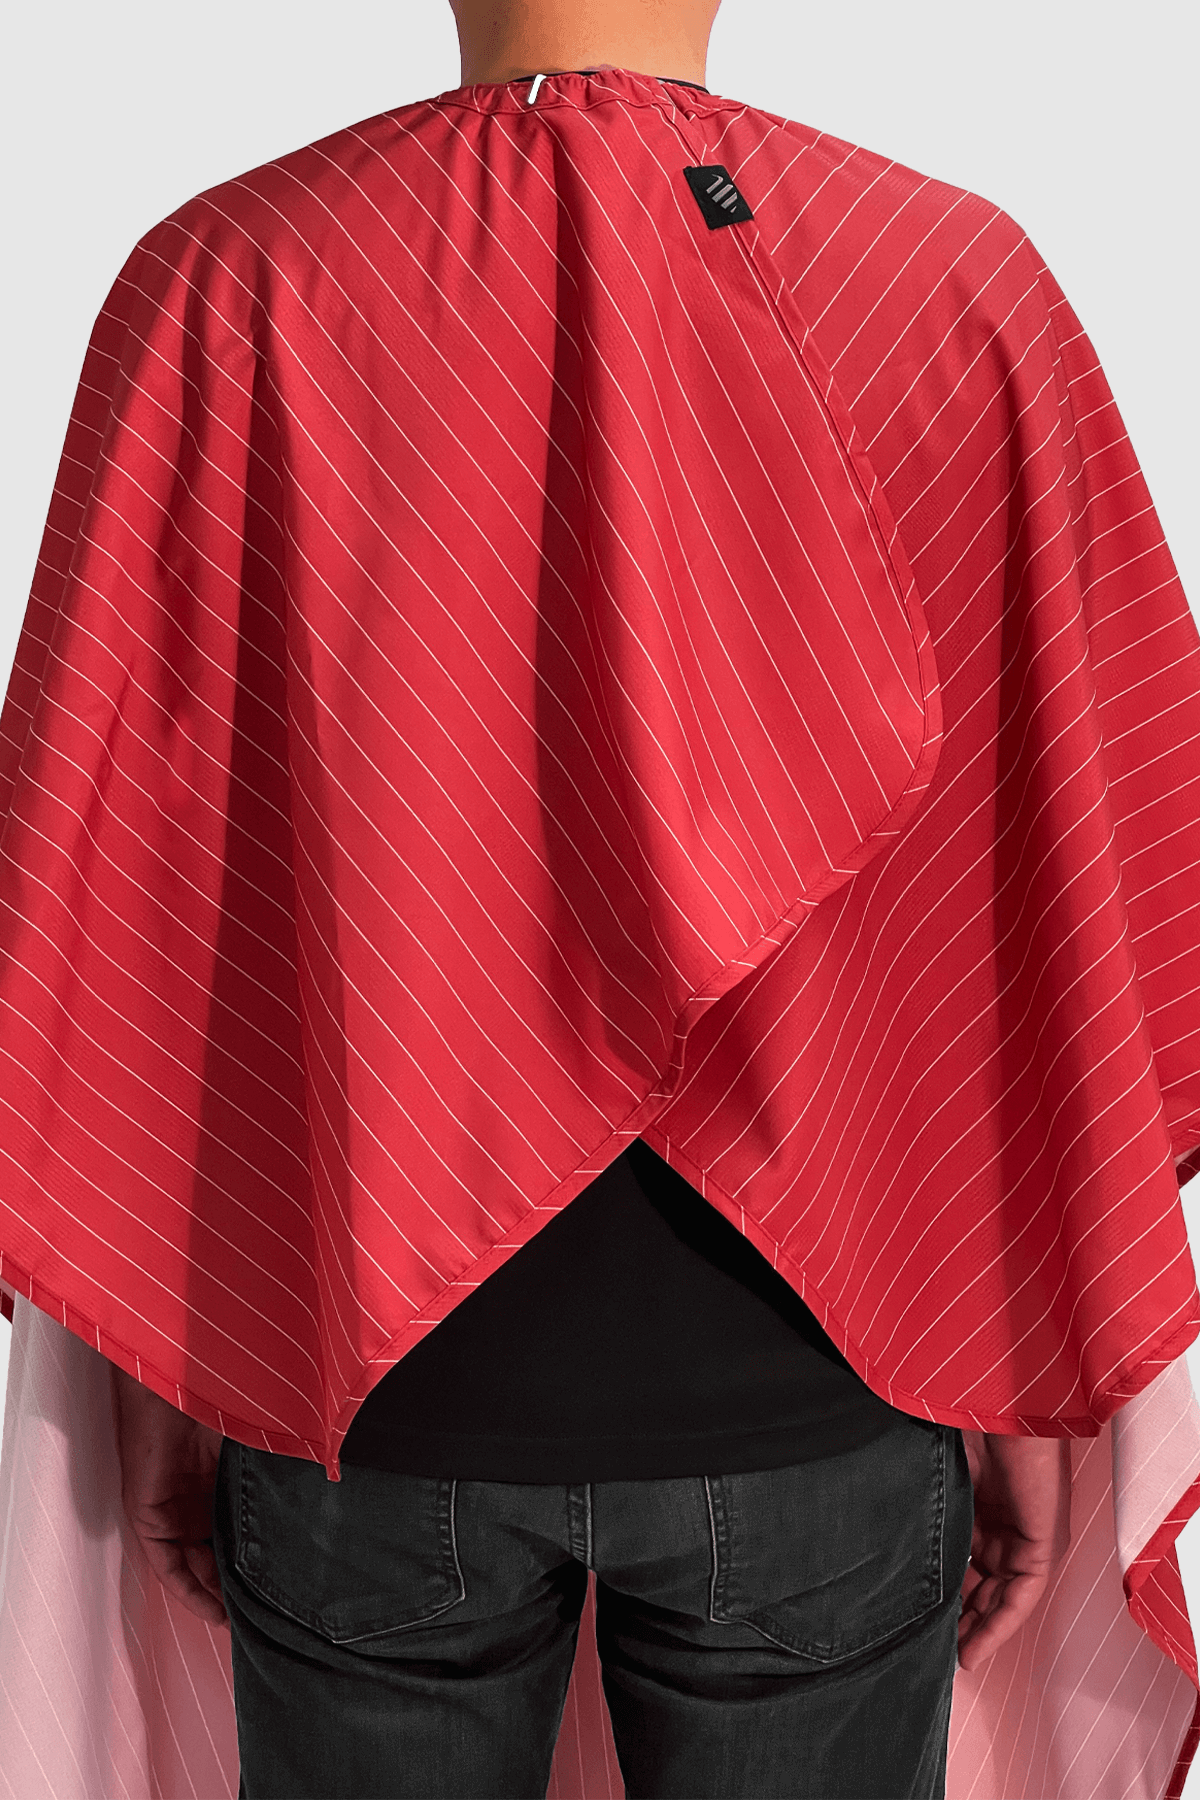 Barber Cape red with white pinstripe